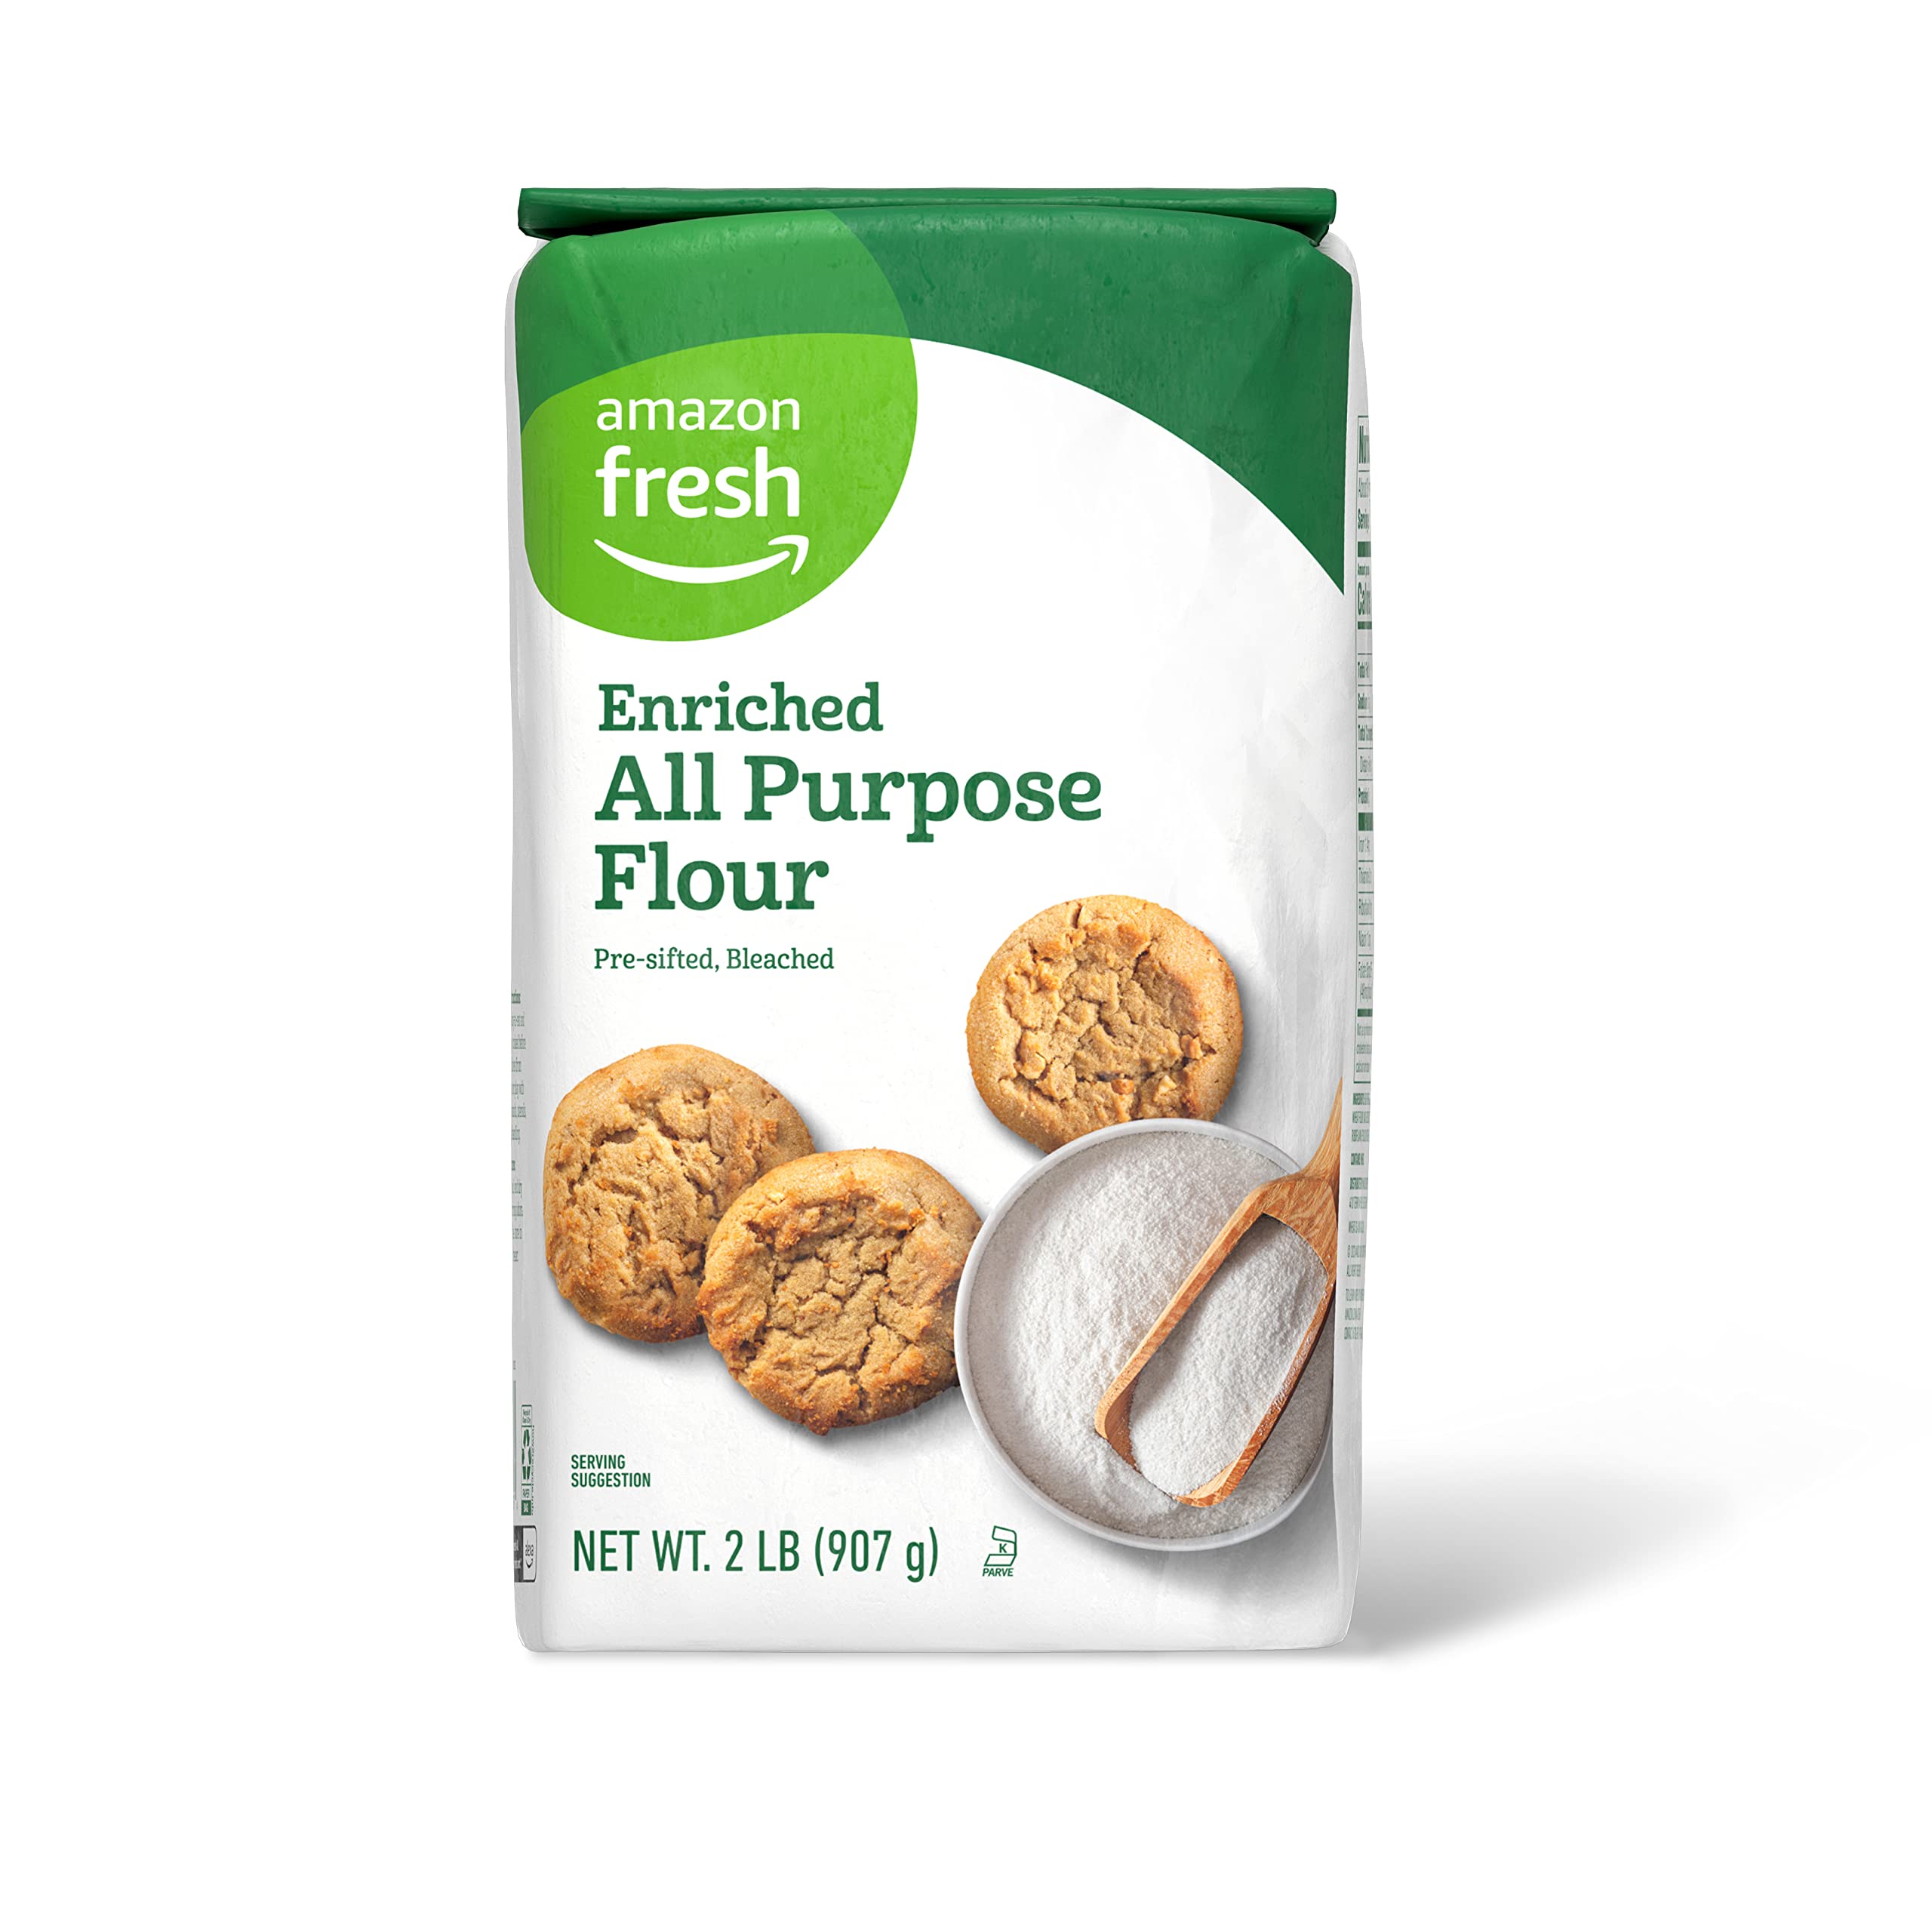 2-lb Amazon Fresh All Purpose Flour $1.29 + Free Shipping w/ Prime or on orders over $35